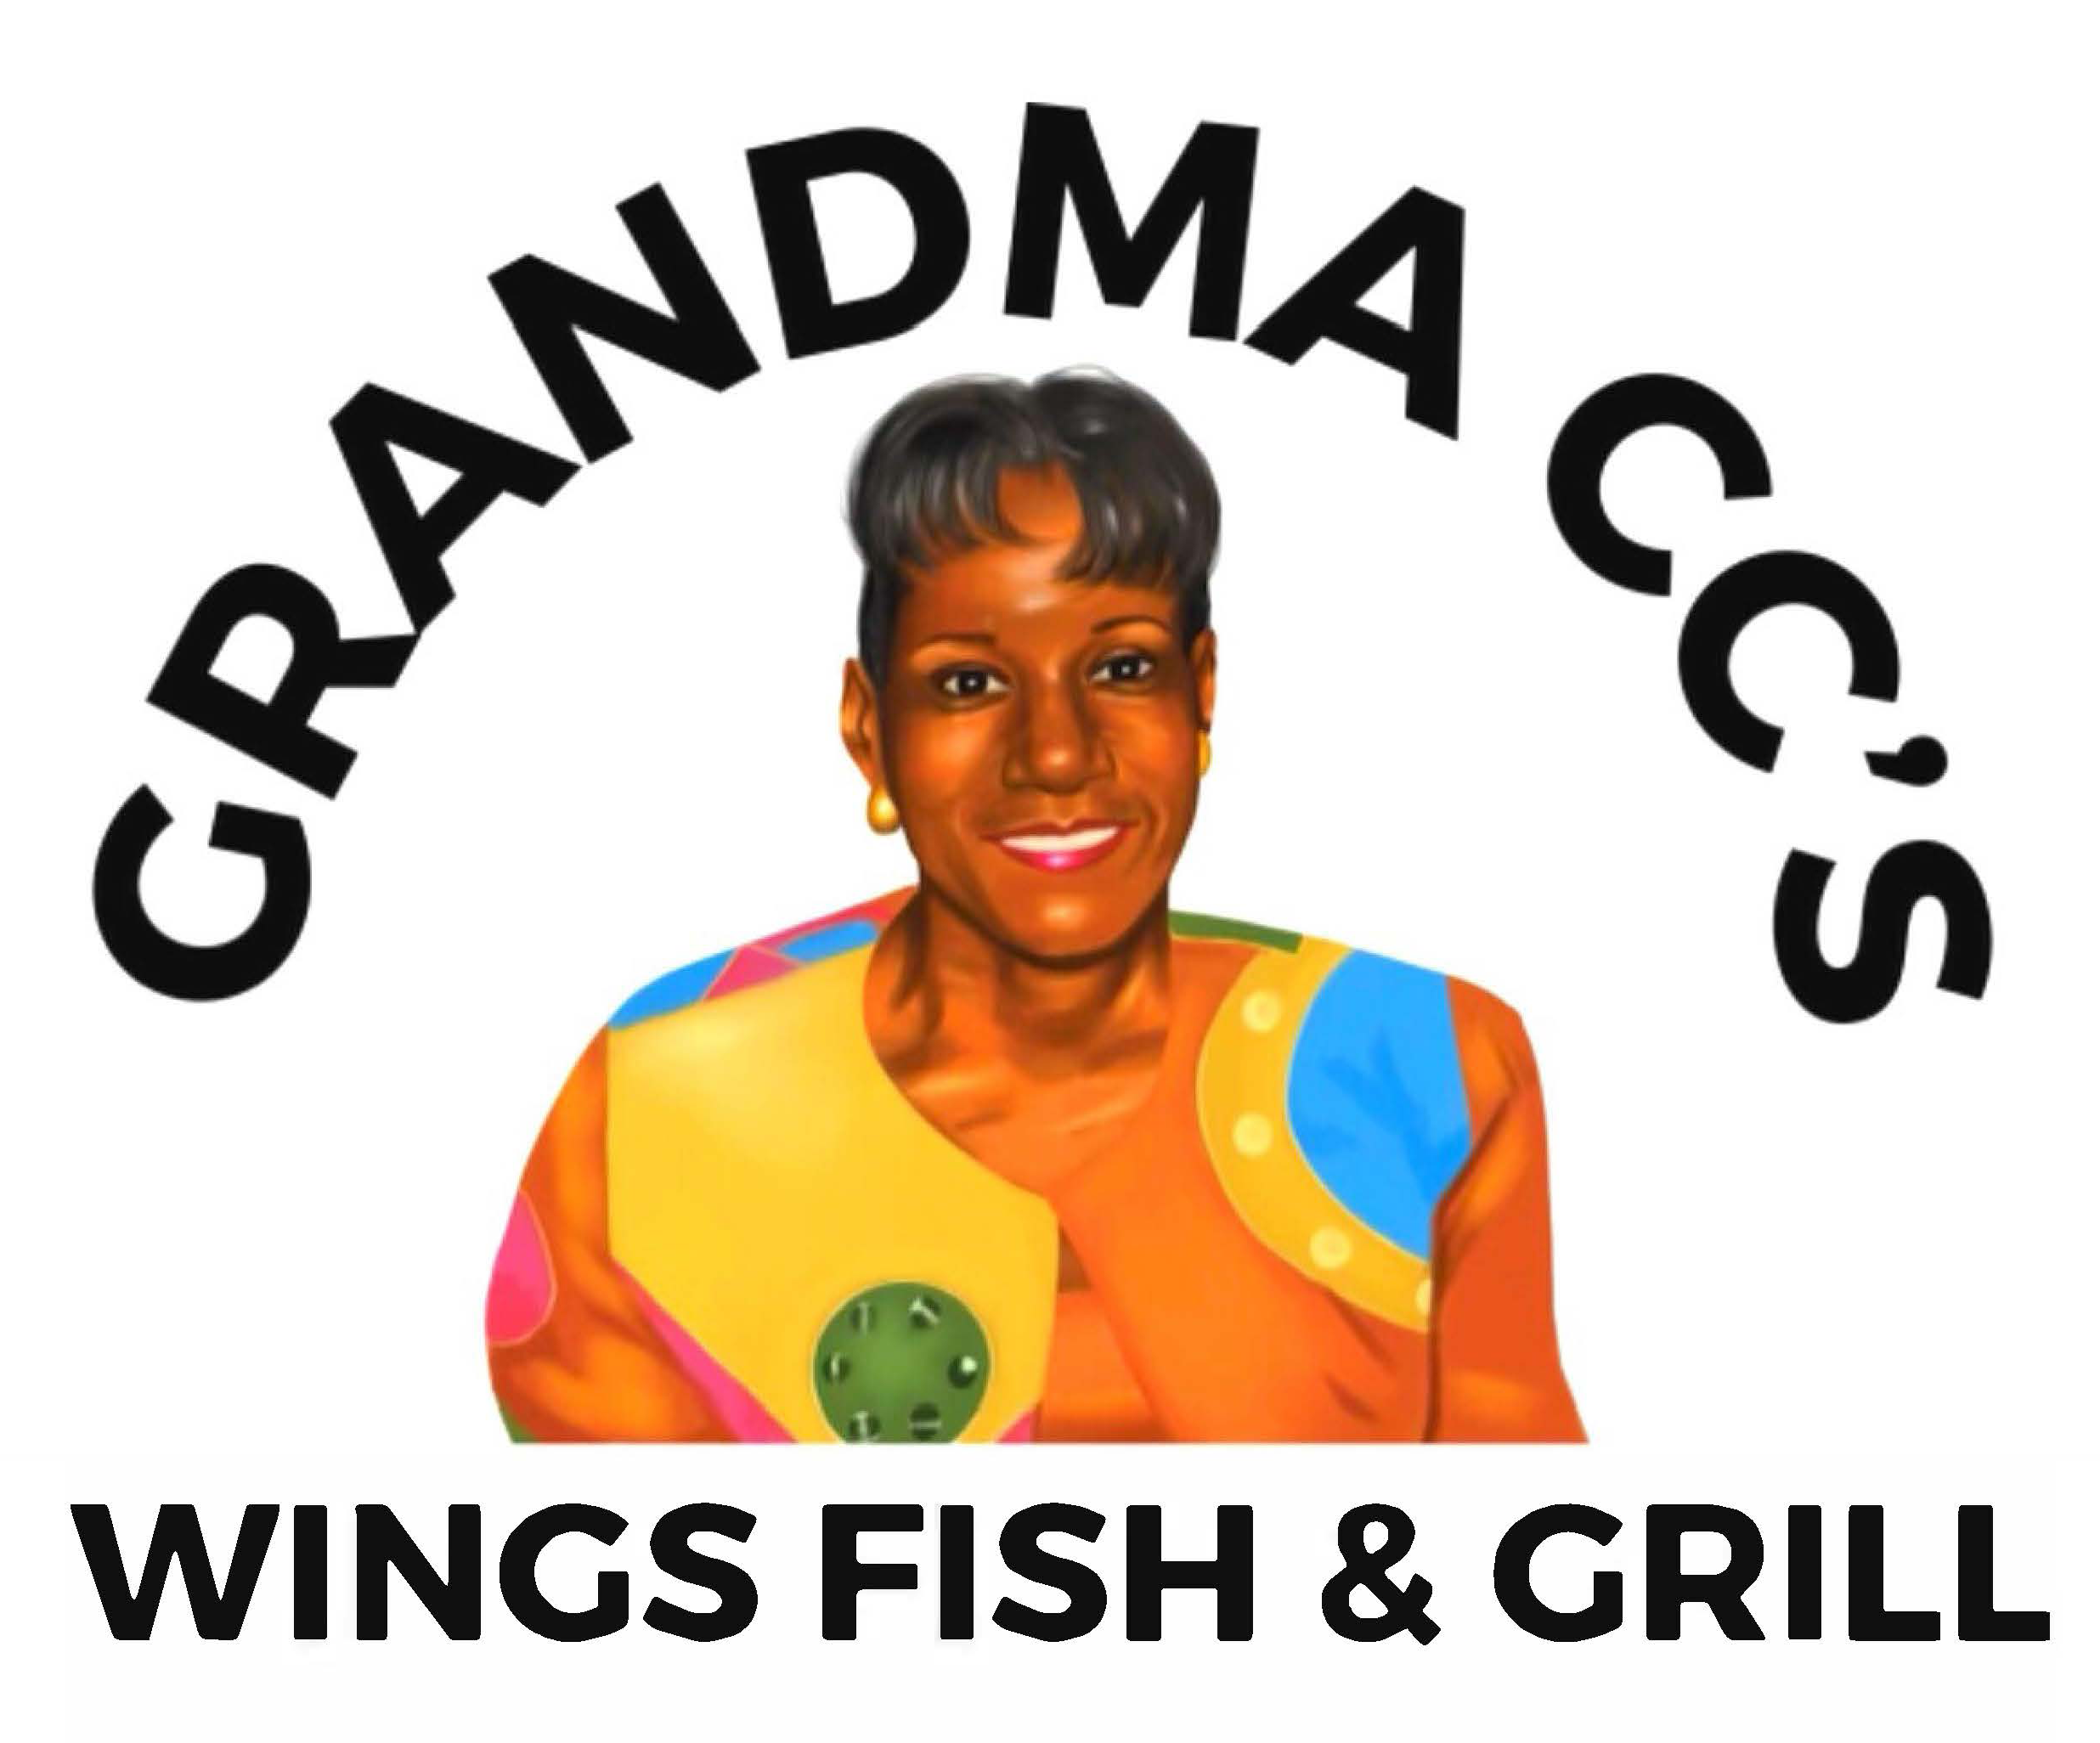 Grand ma cc's wings fish and grill